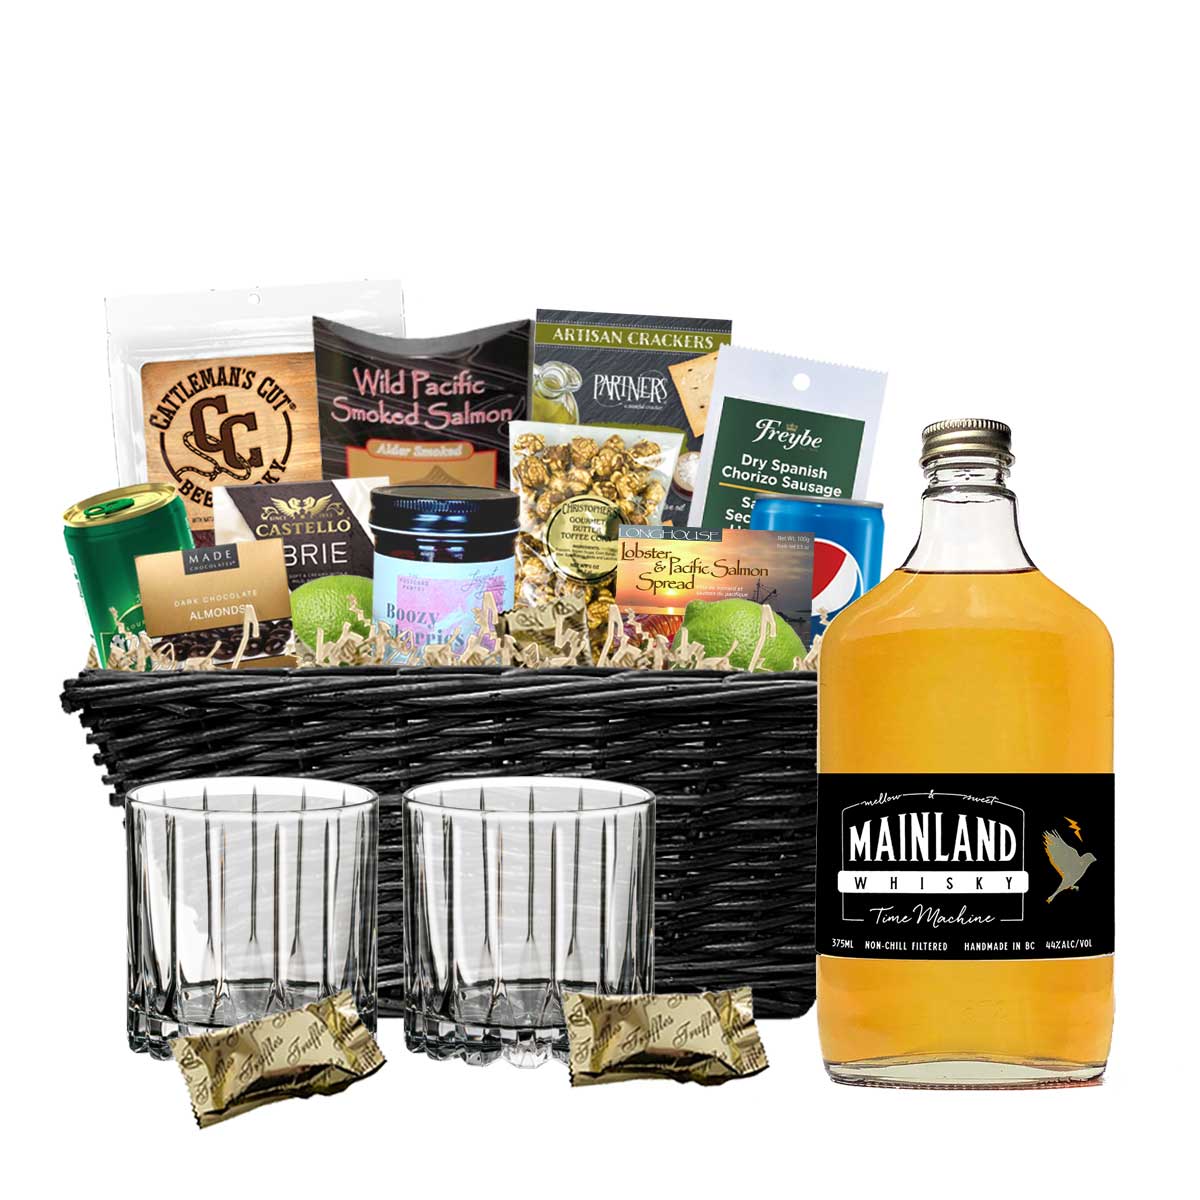 TAG Liquor Stores BC - Mainland Whisky Time machine 750ml Gift Basket